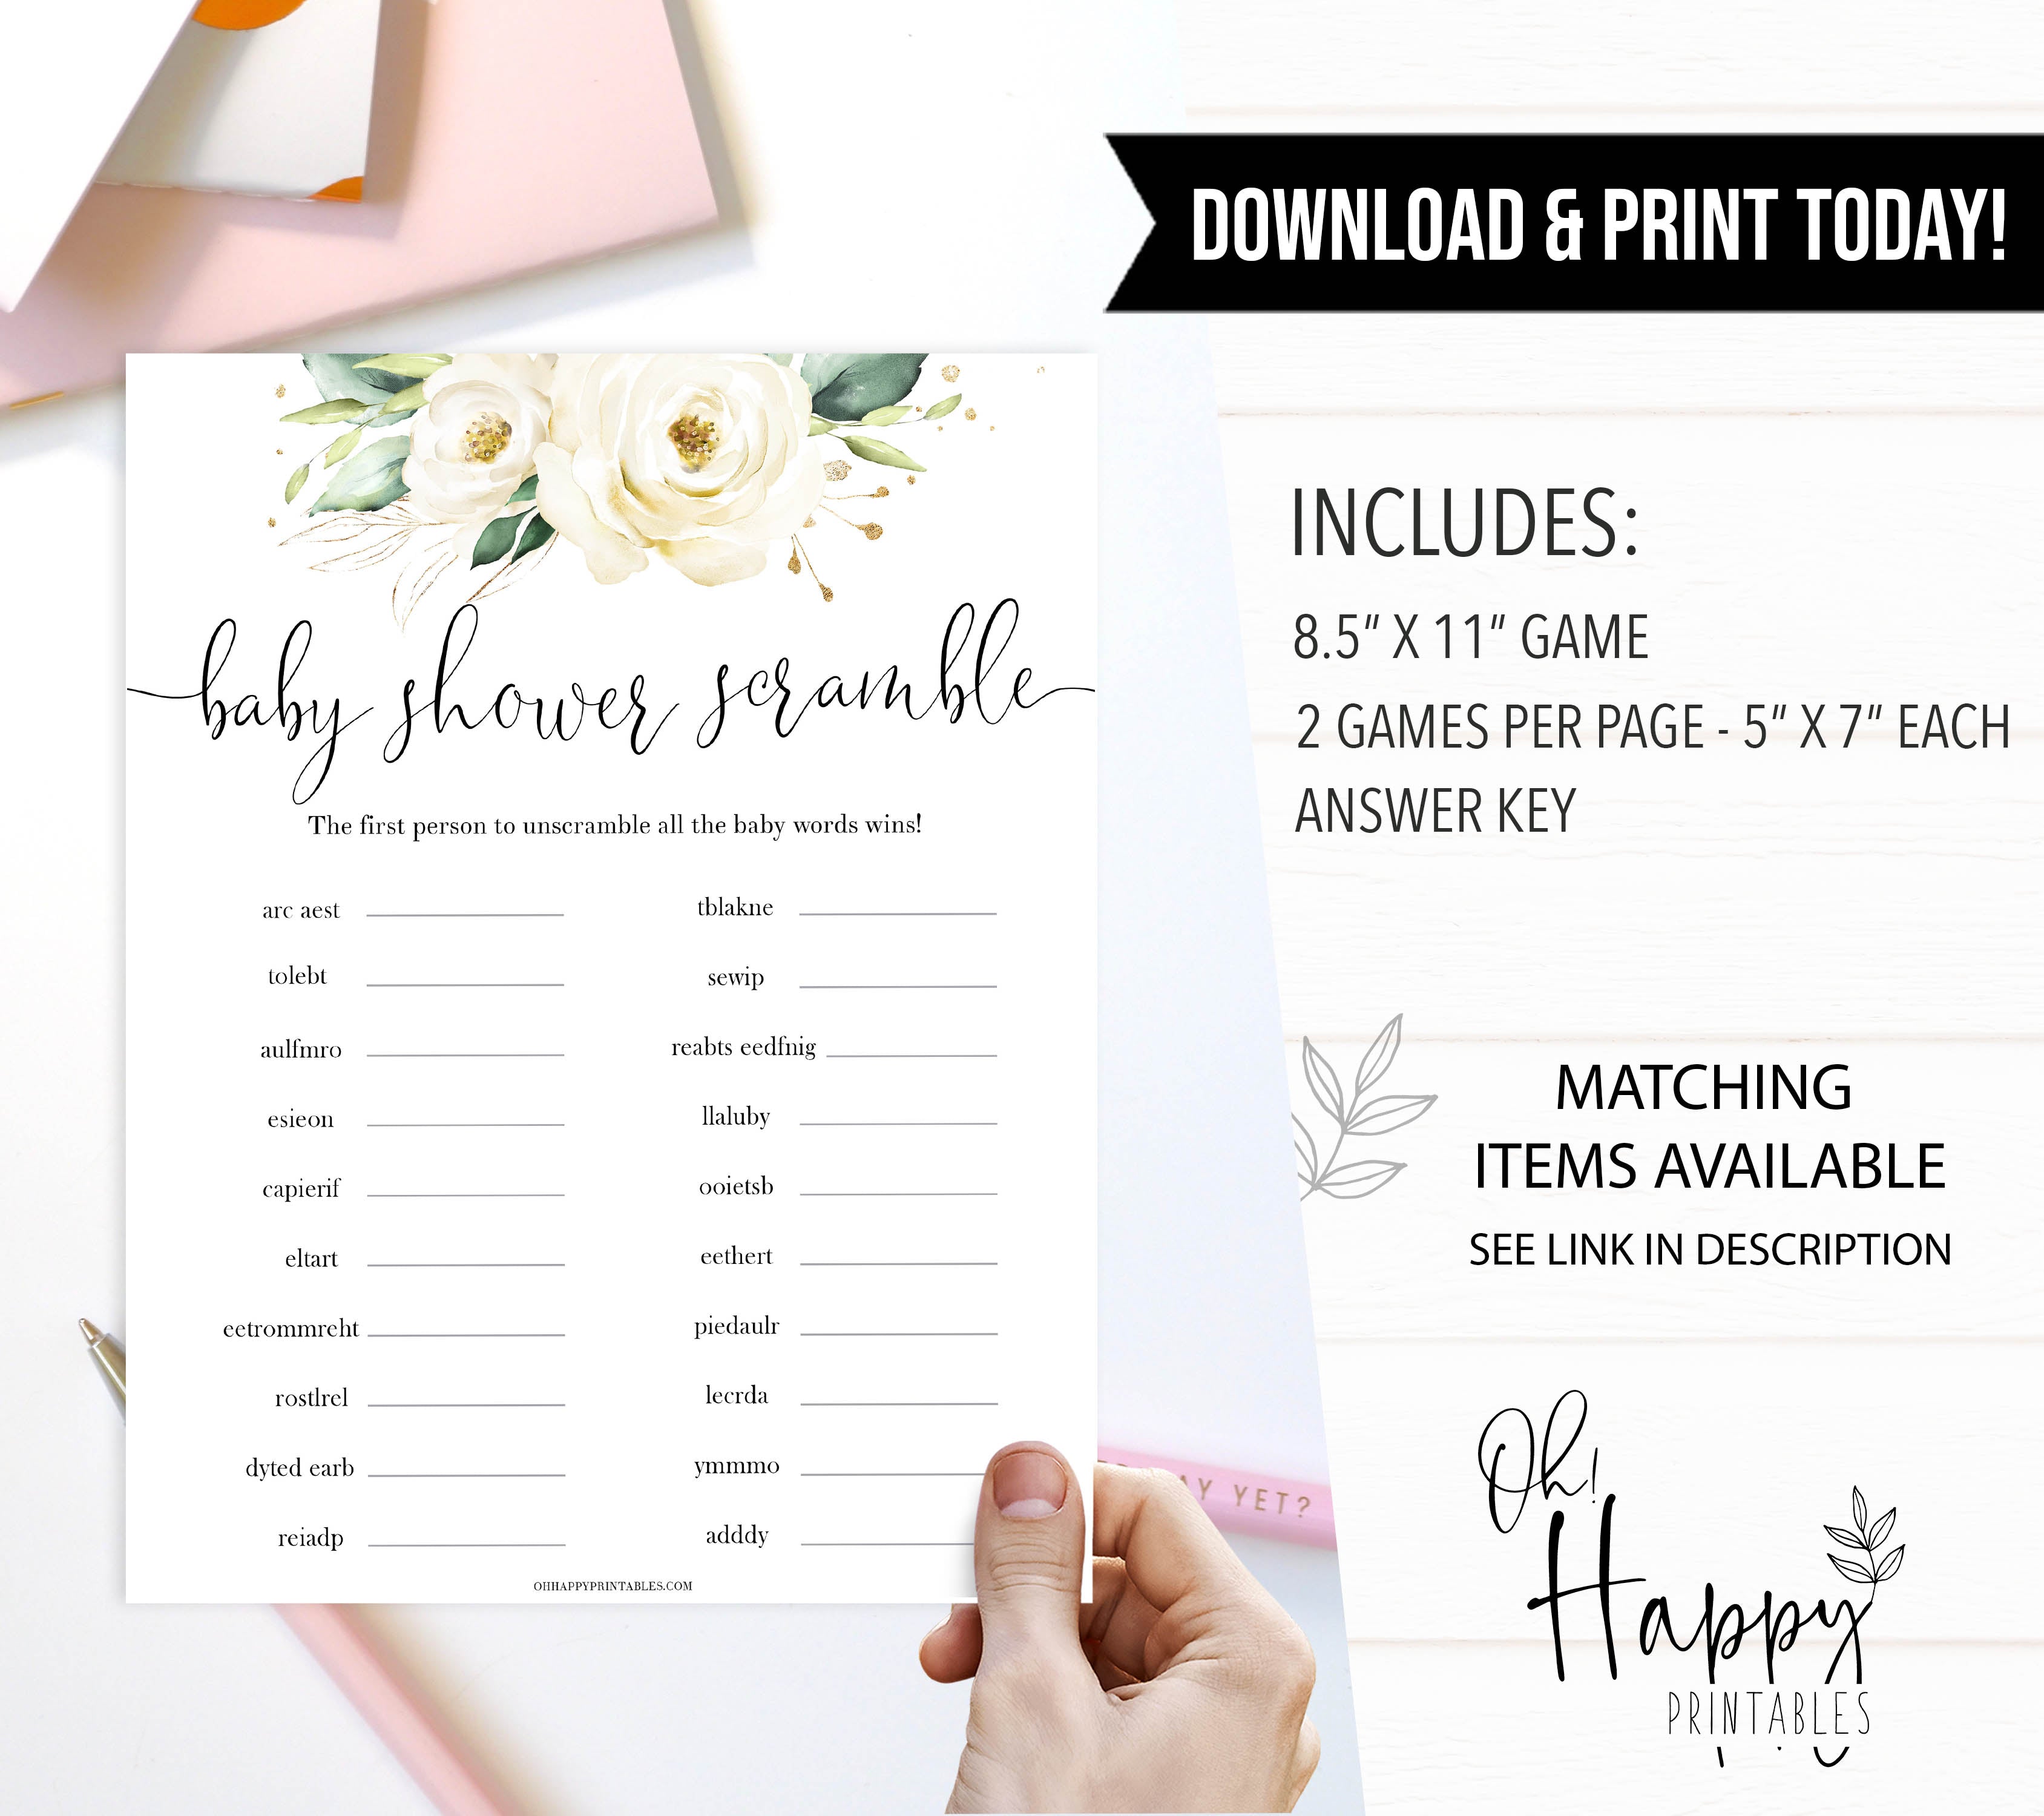 baby word scramble game, Printable baby shower games, shite floral baby games, baby shower games, fun baby shower ideas, top baby shower ideas, floral baby shower, baby shower games, fun floral baby shower ideas